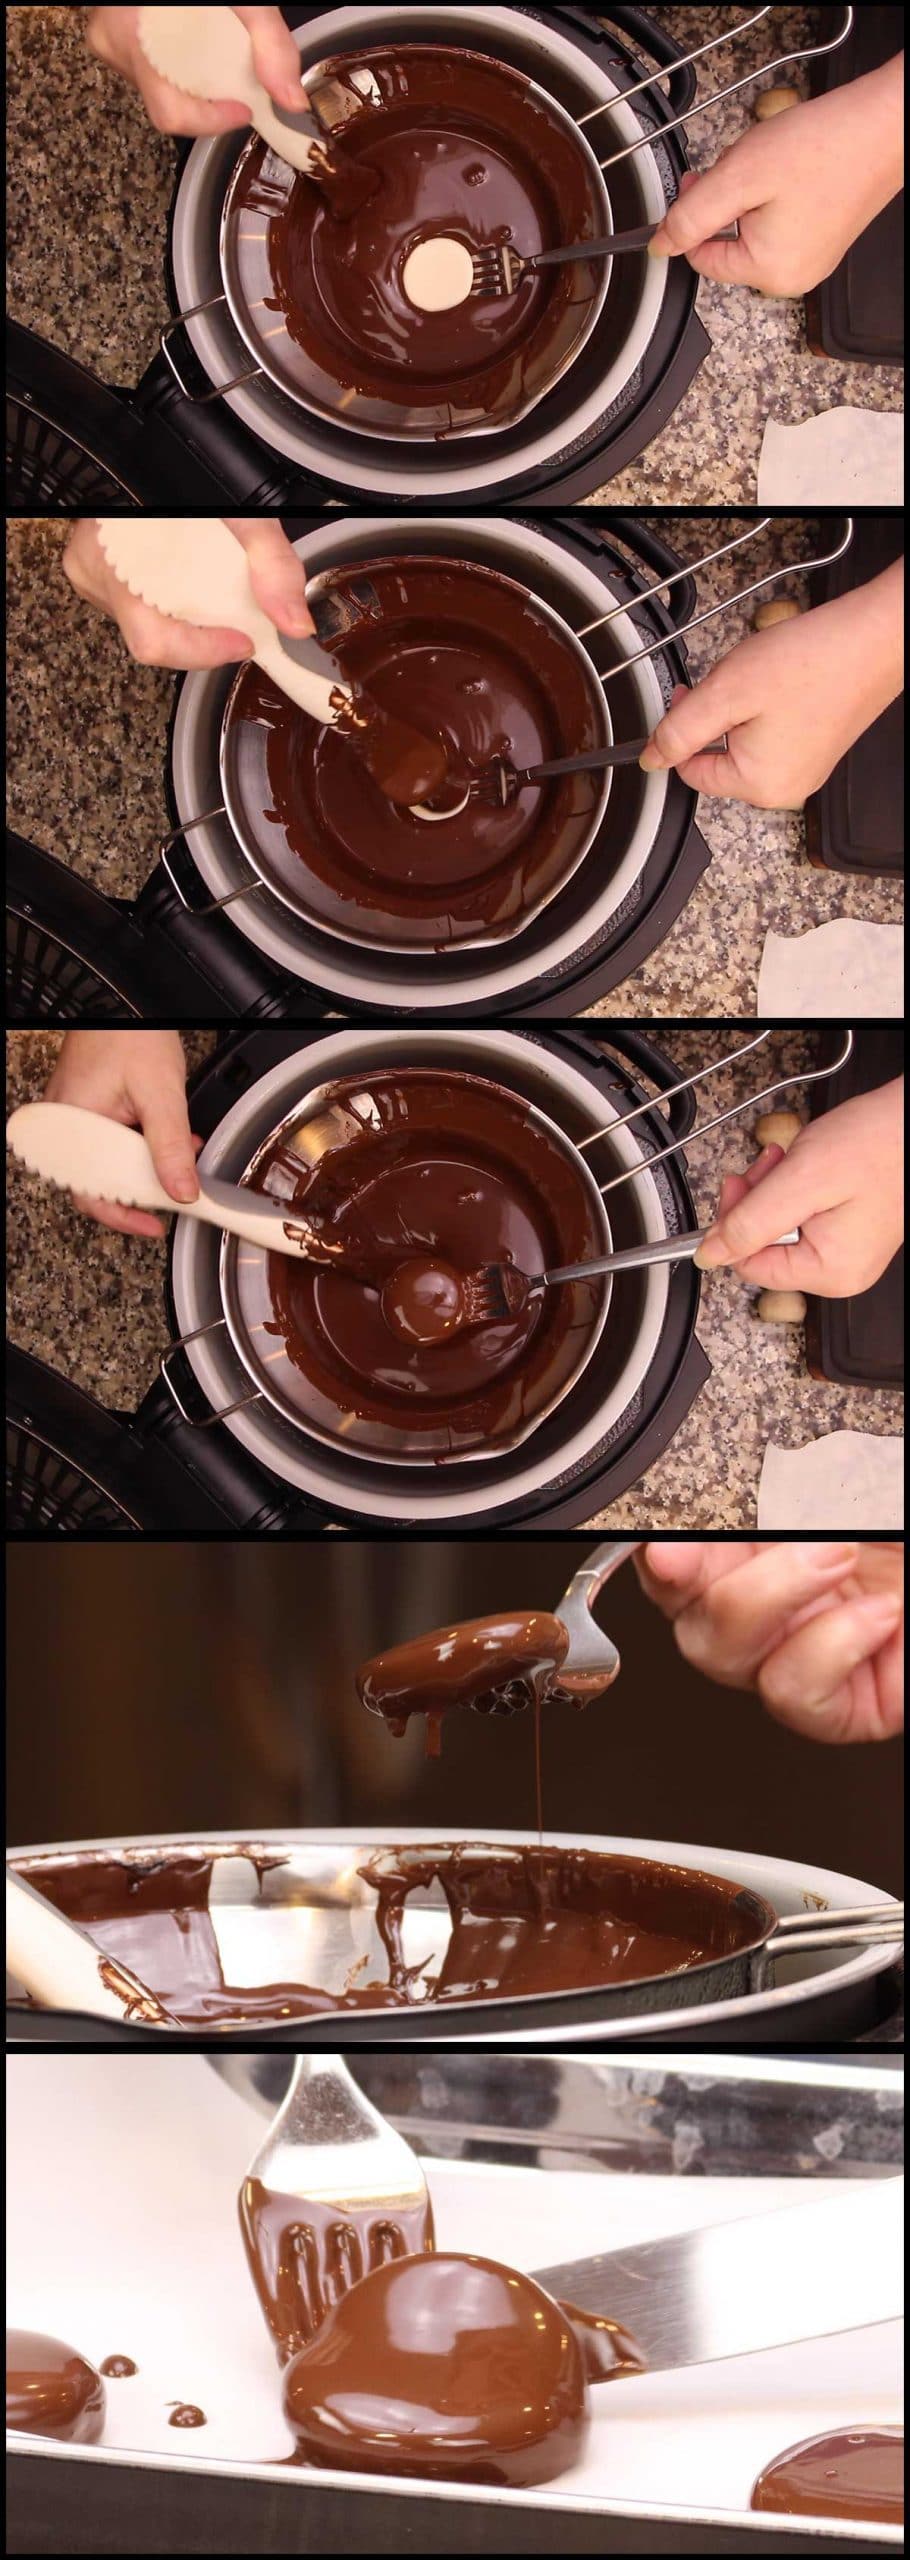 dipping peppermint patties in chocolate